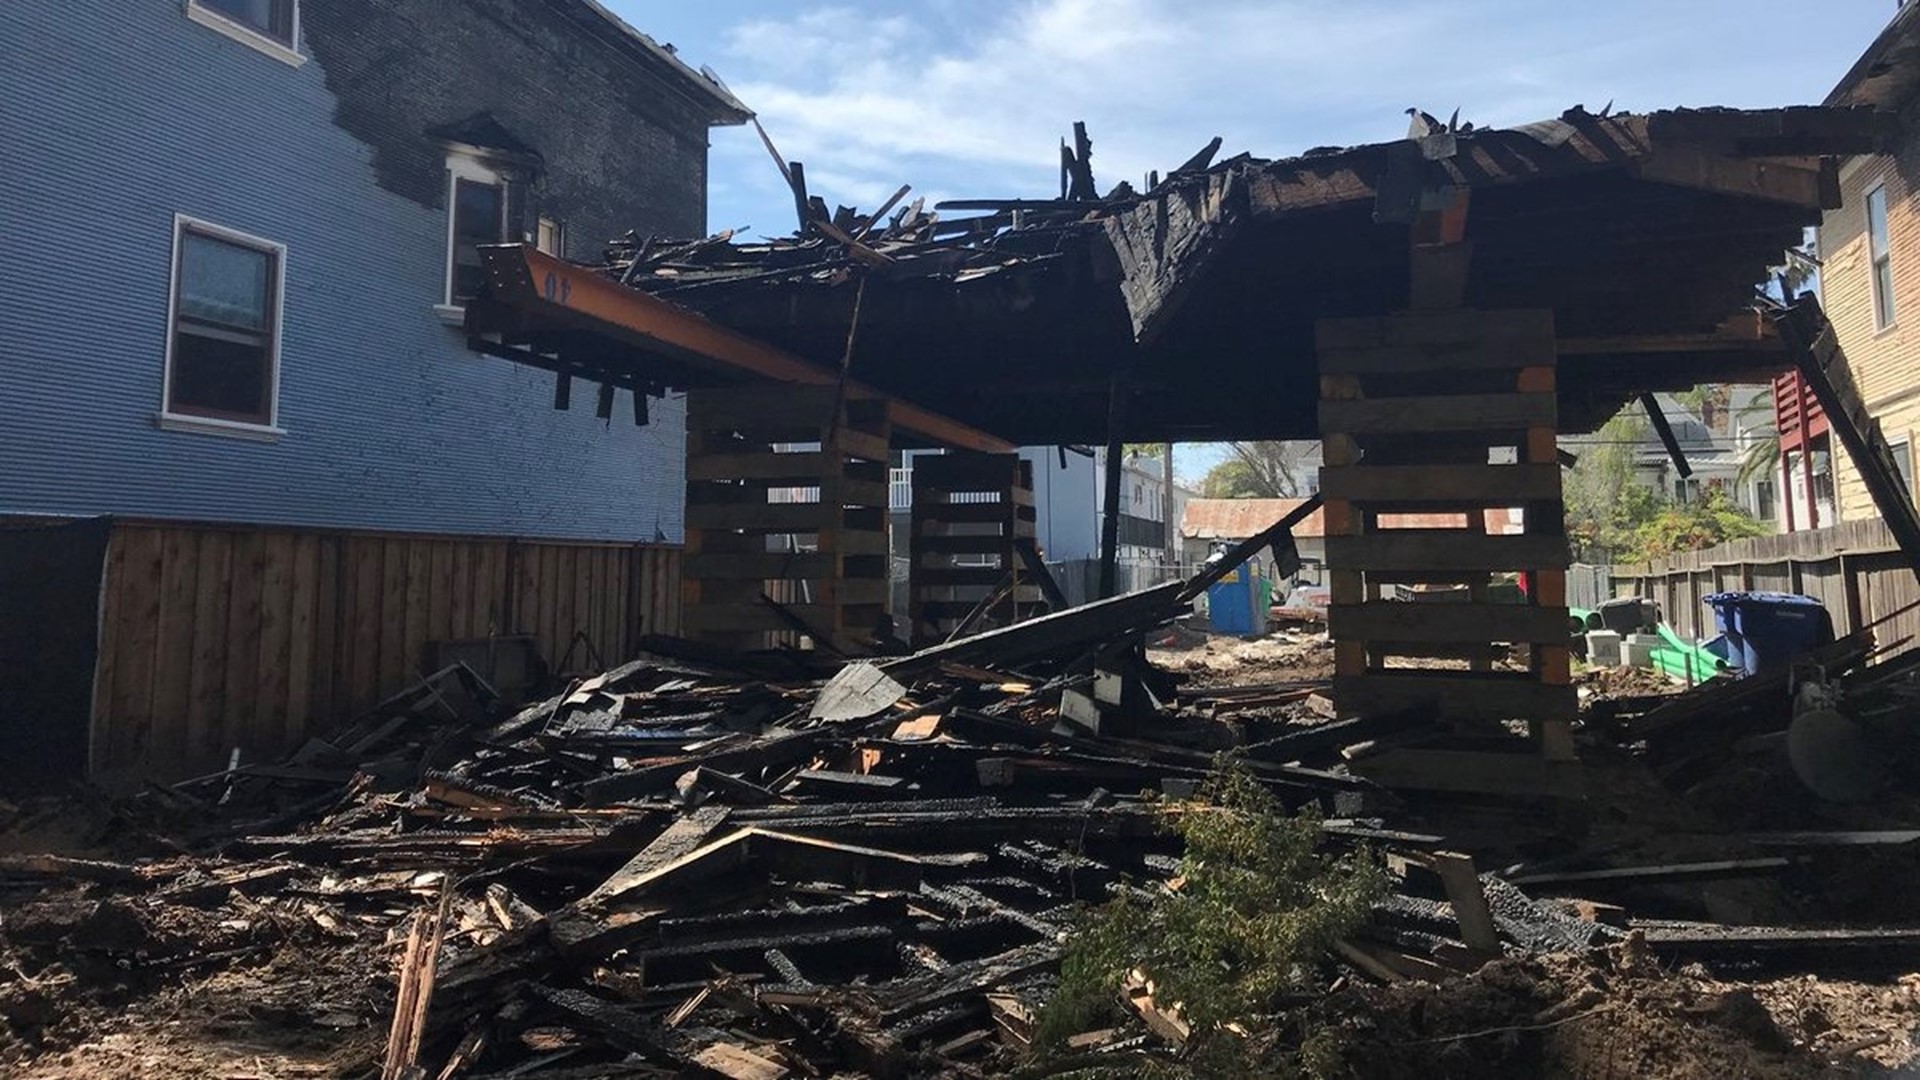 Neighbors have their own suspicions regarding what happened in their neighborhoods when two houses owned by the same property owner went up in flames. Fire officials say they're considering all causes and not ruling out arson in the investigation.